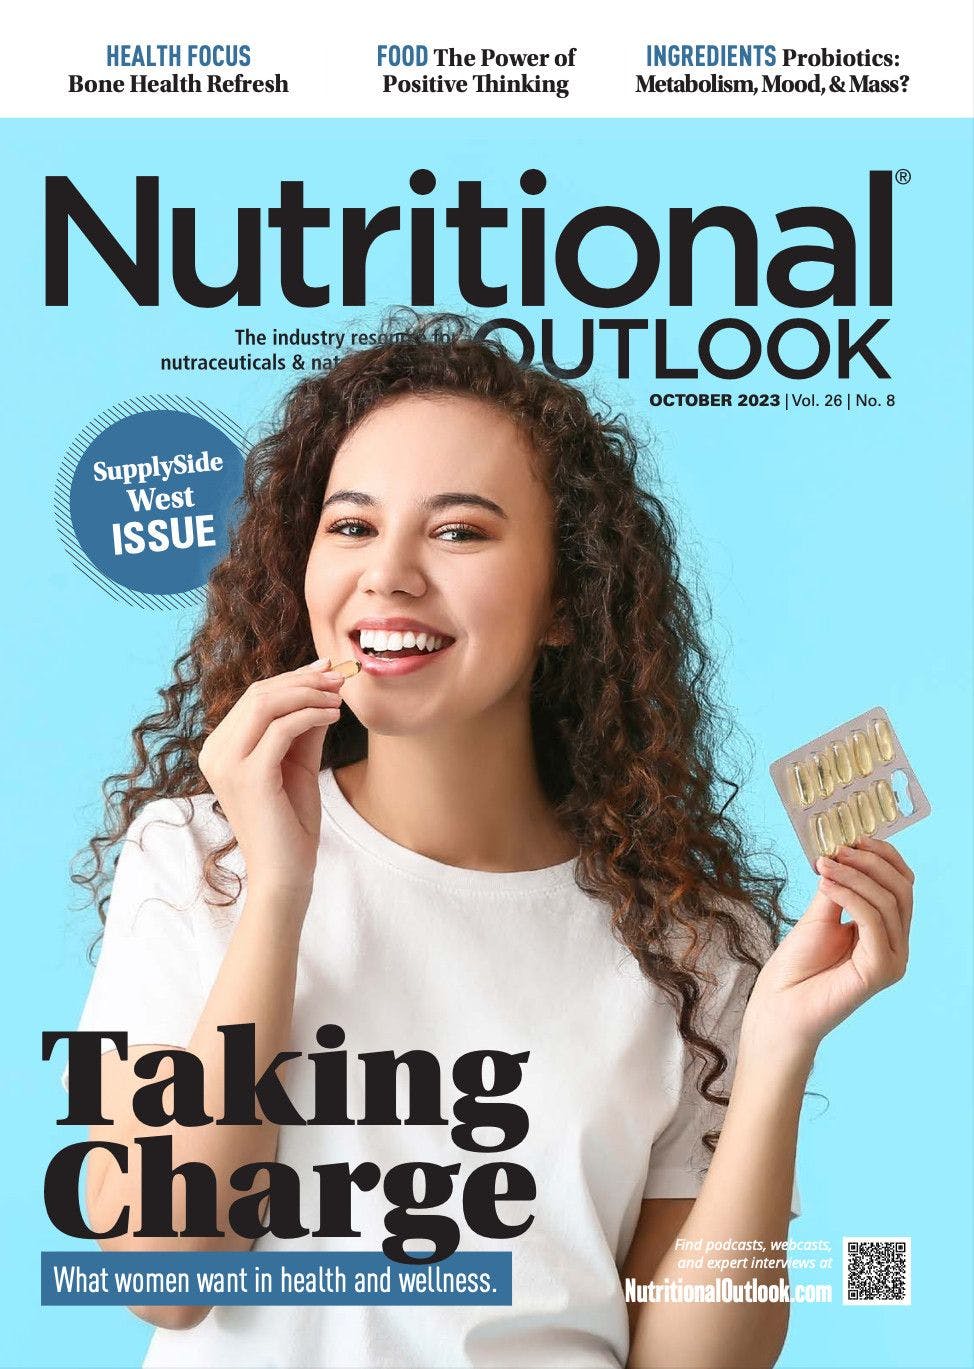 Nutritional Outlook Vol. 26 No. 8